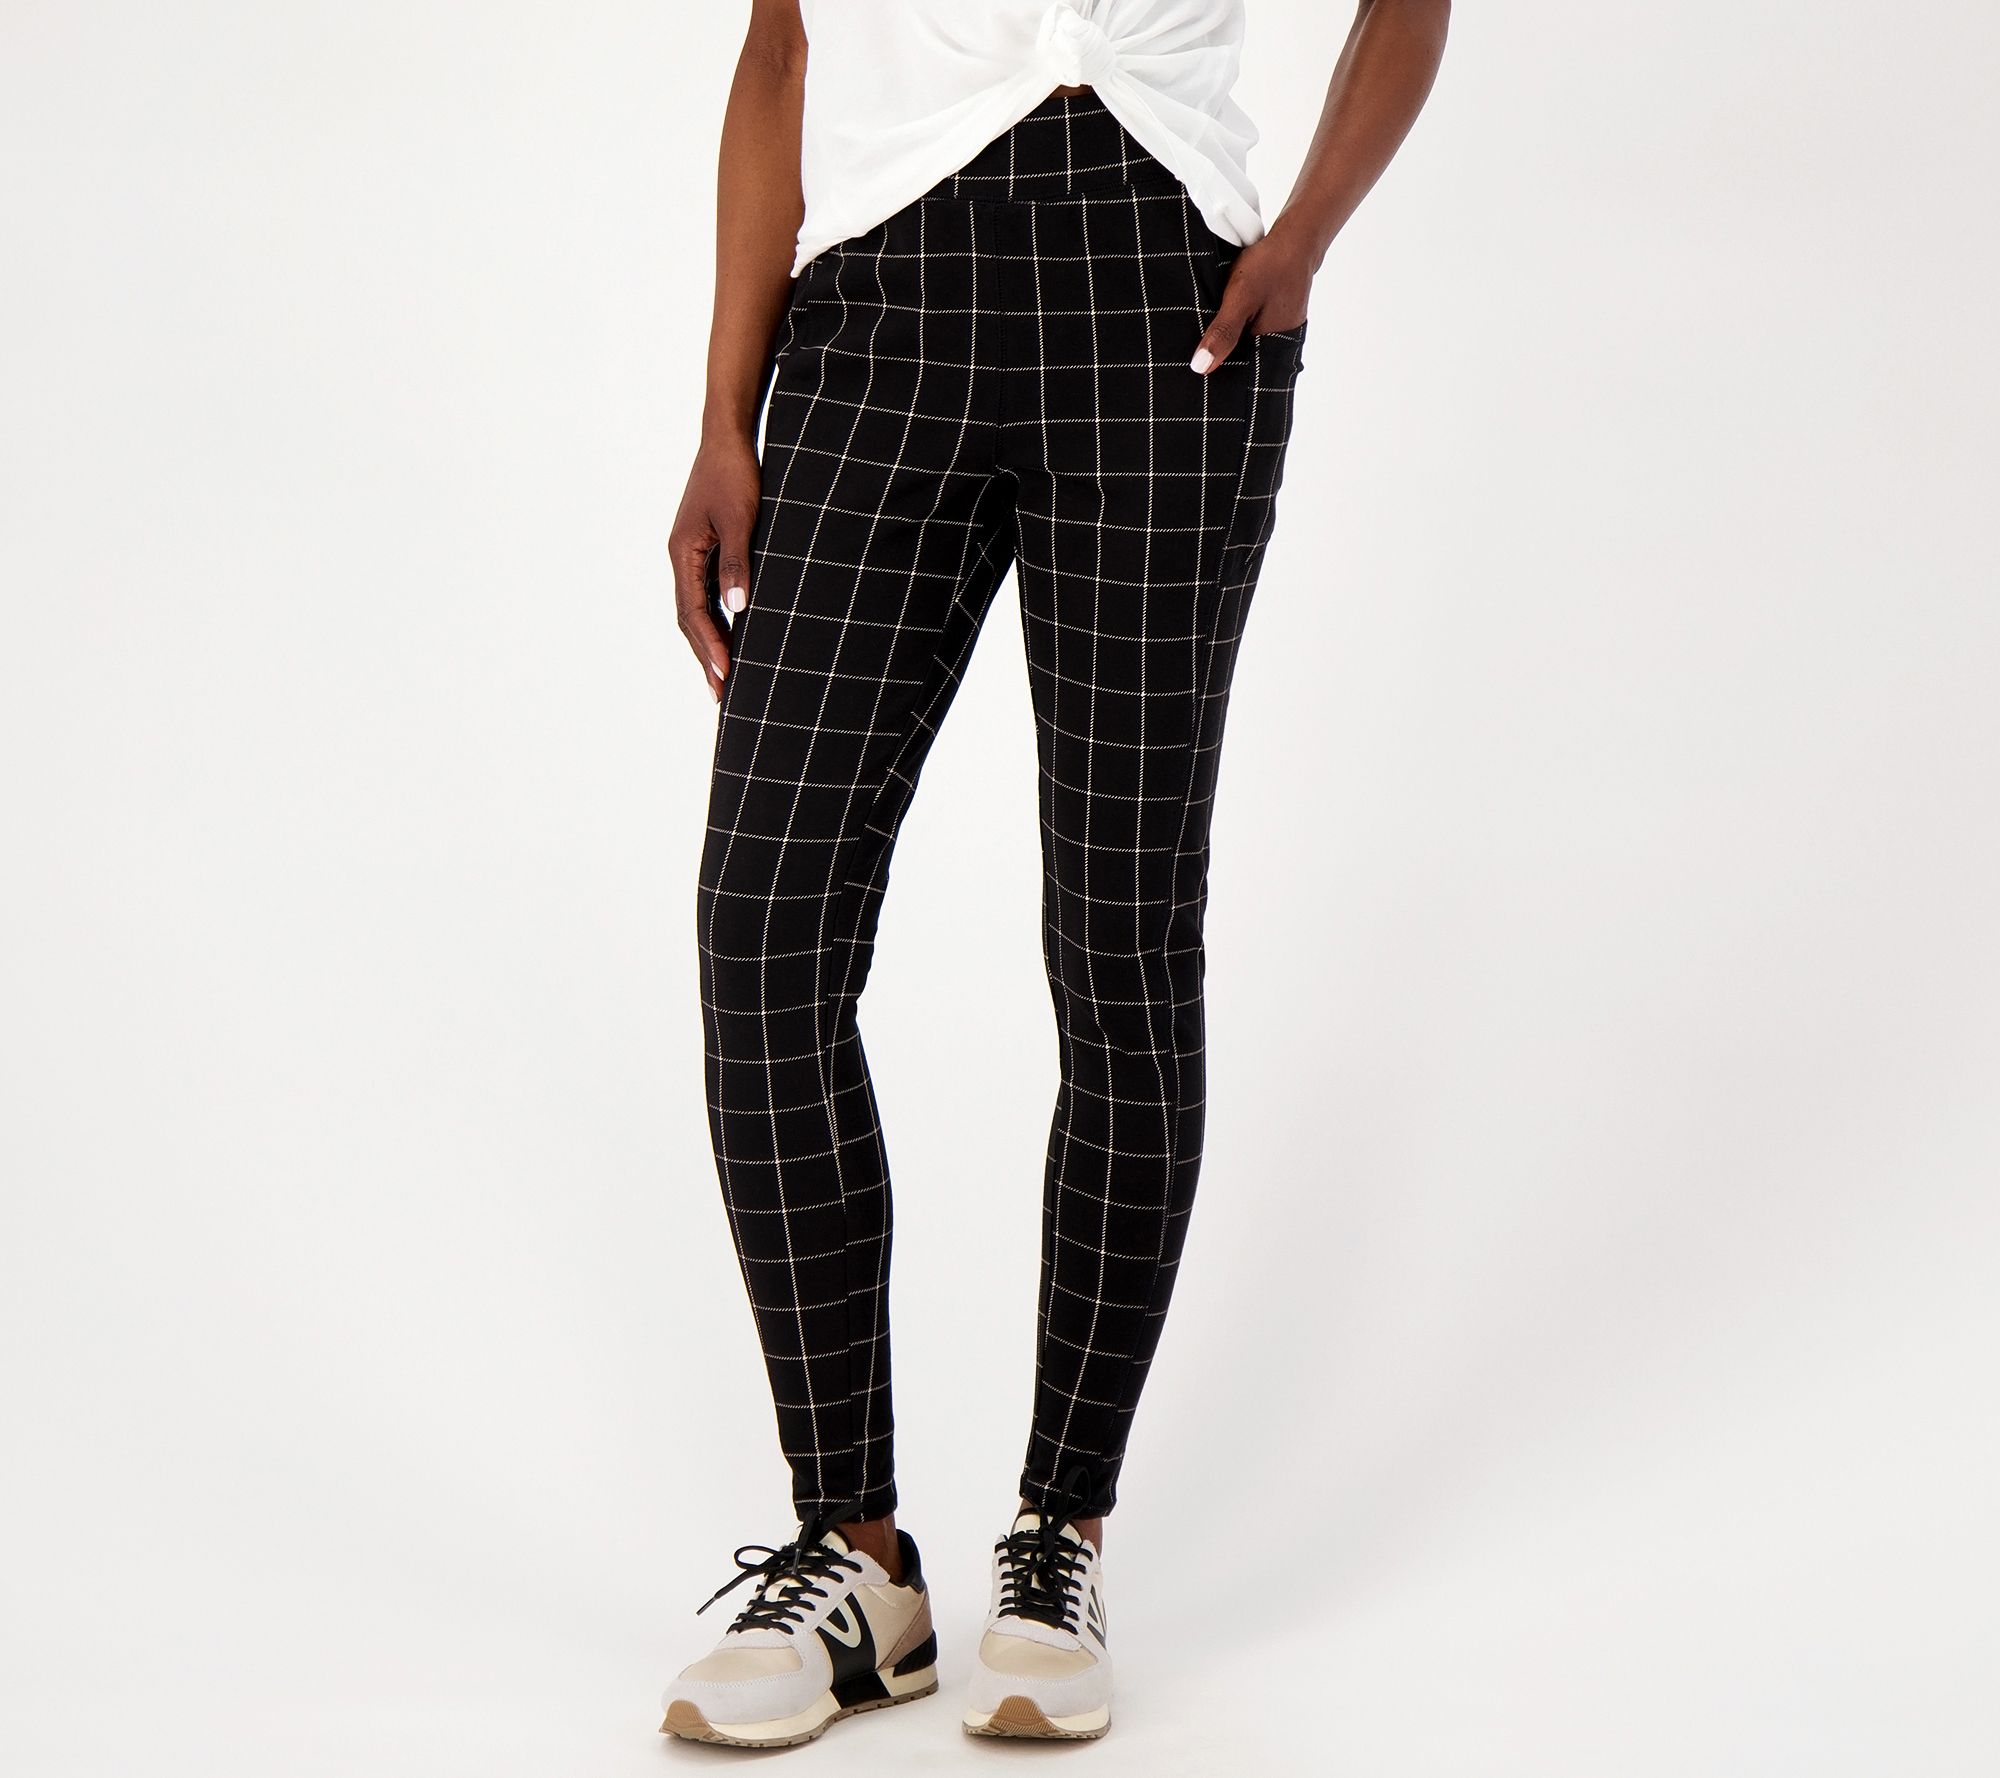 Denim & Co. Active Printed or Solid Duo Stretch Pant w/ Pocket 